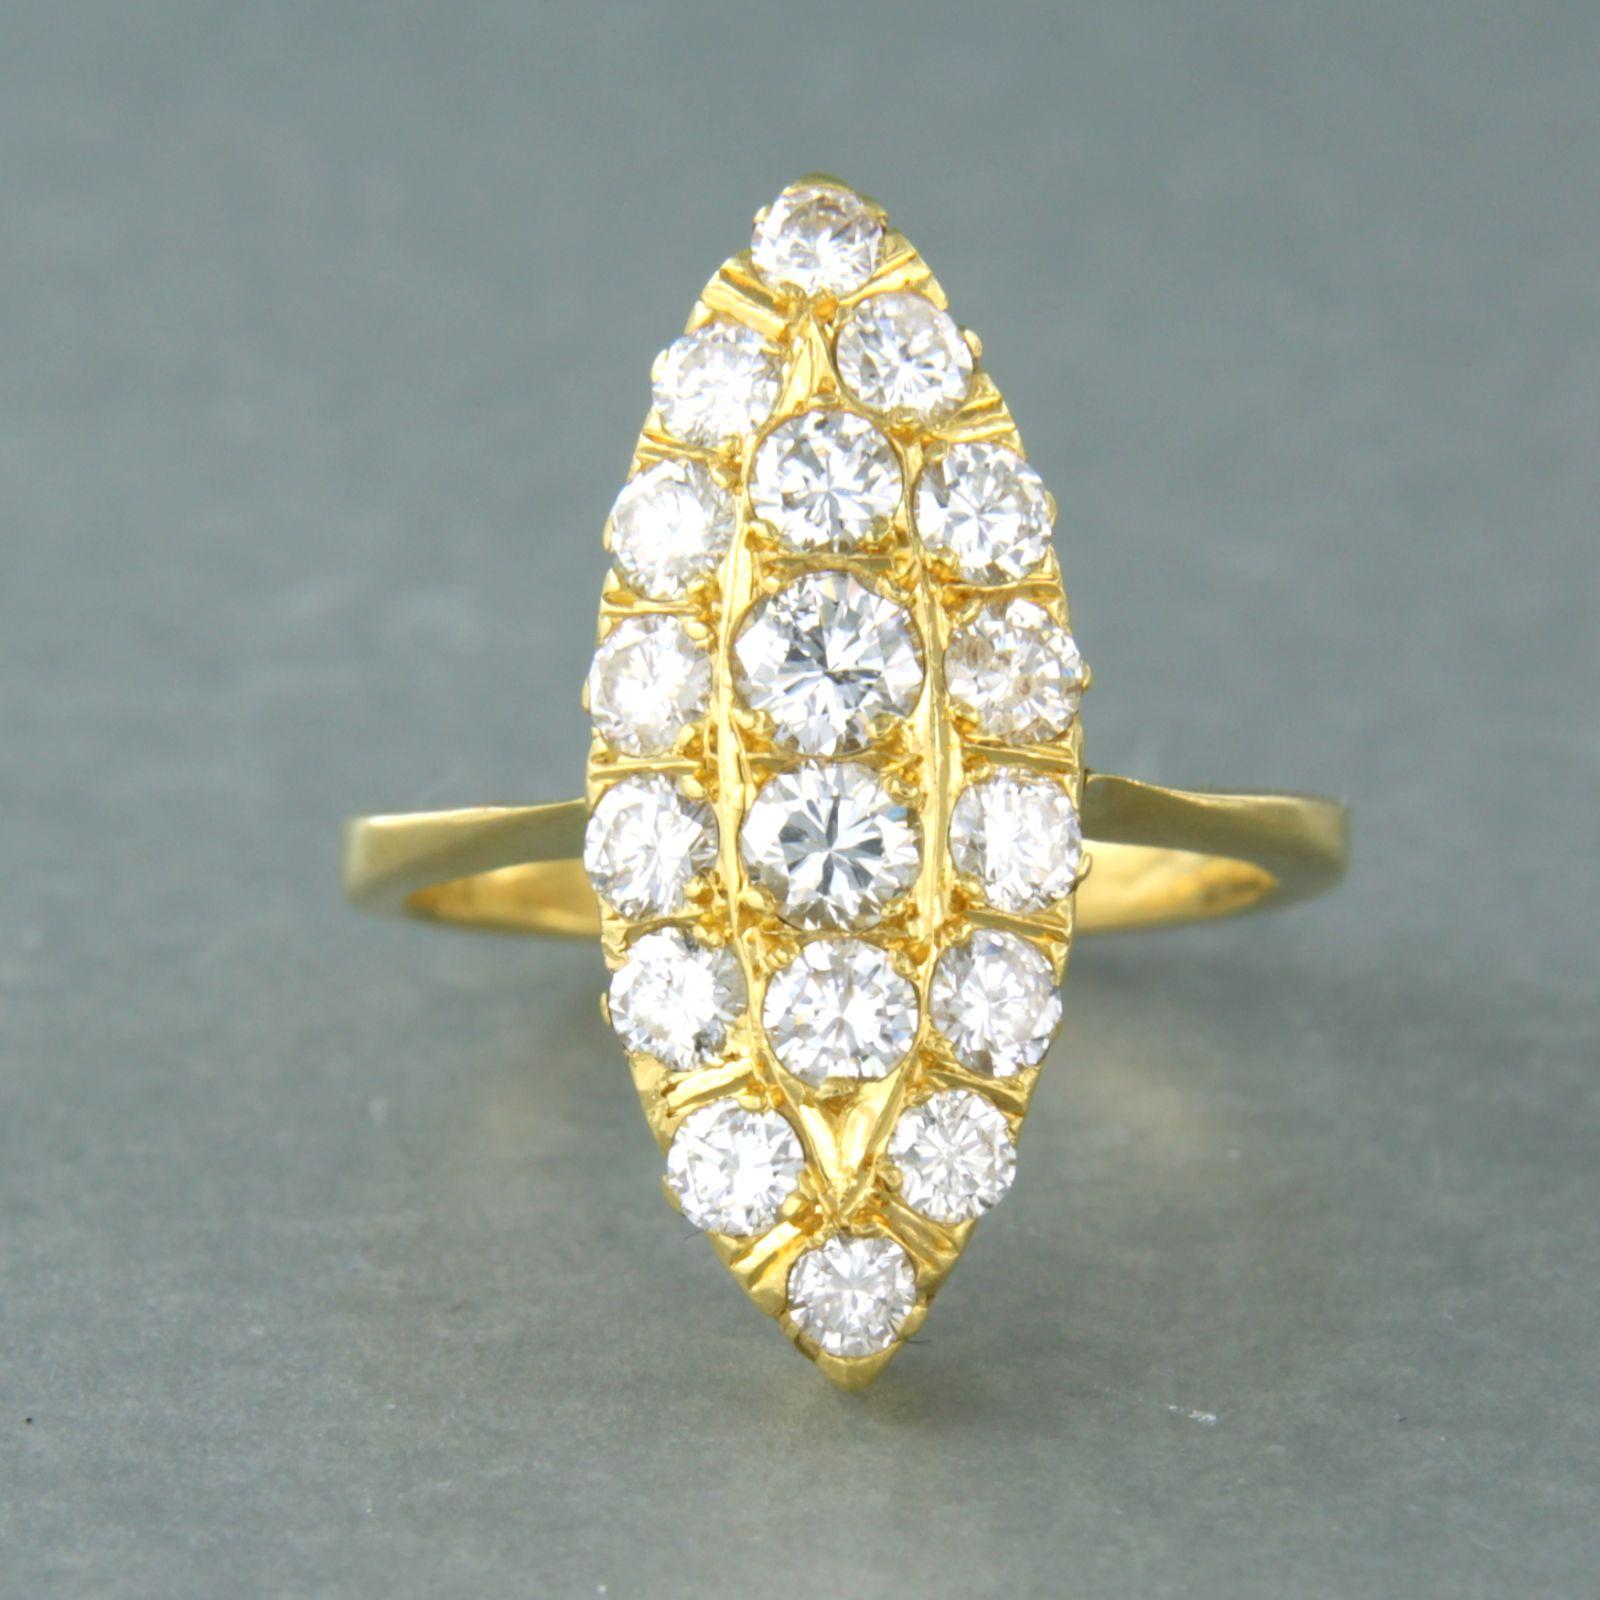 20k yellow gold ring with brilliant cut diamond. 1.35ct – H/I – SI/Pique - ring size U.S. 6 – EU. 16.5(53)

Detailed description

the top of the ring is 2.2 cm wide and 5.9 mm high

Ring size US 6.5 – EU. 17(53), ring can be enlarged or reduced a